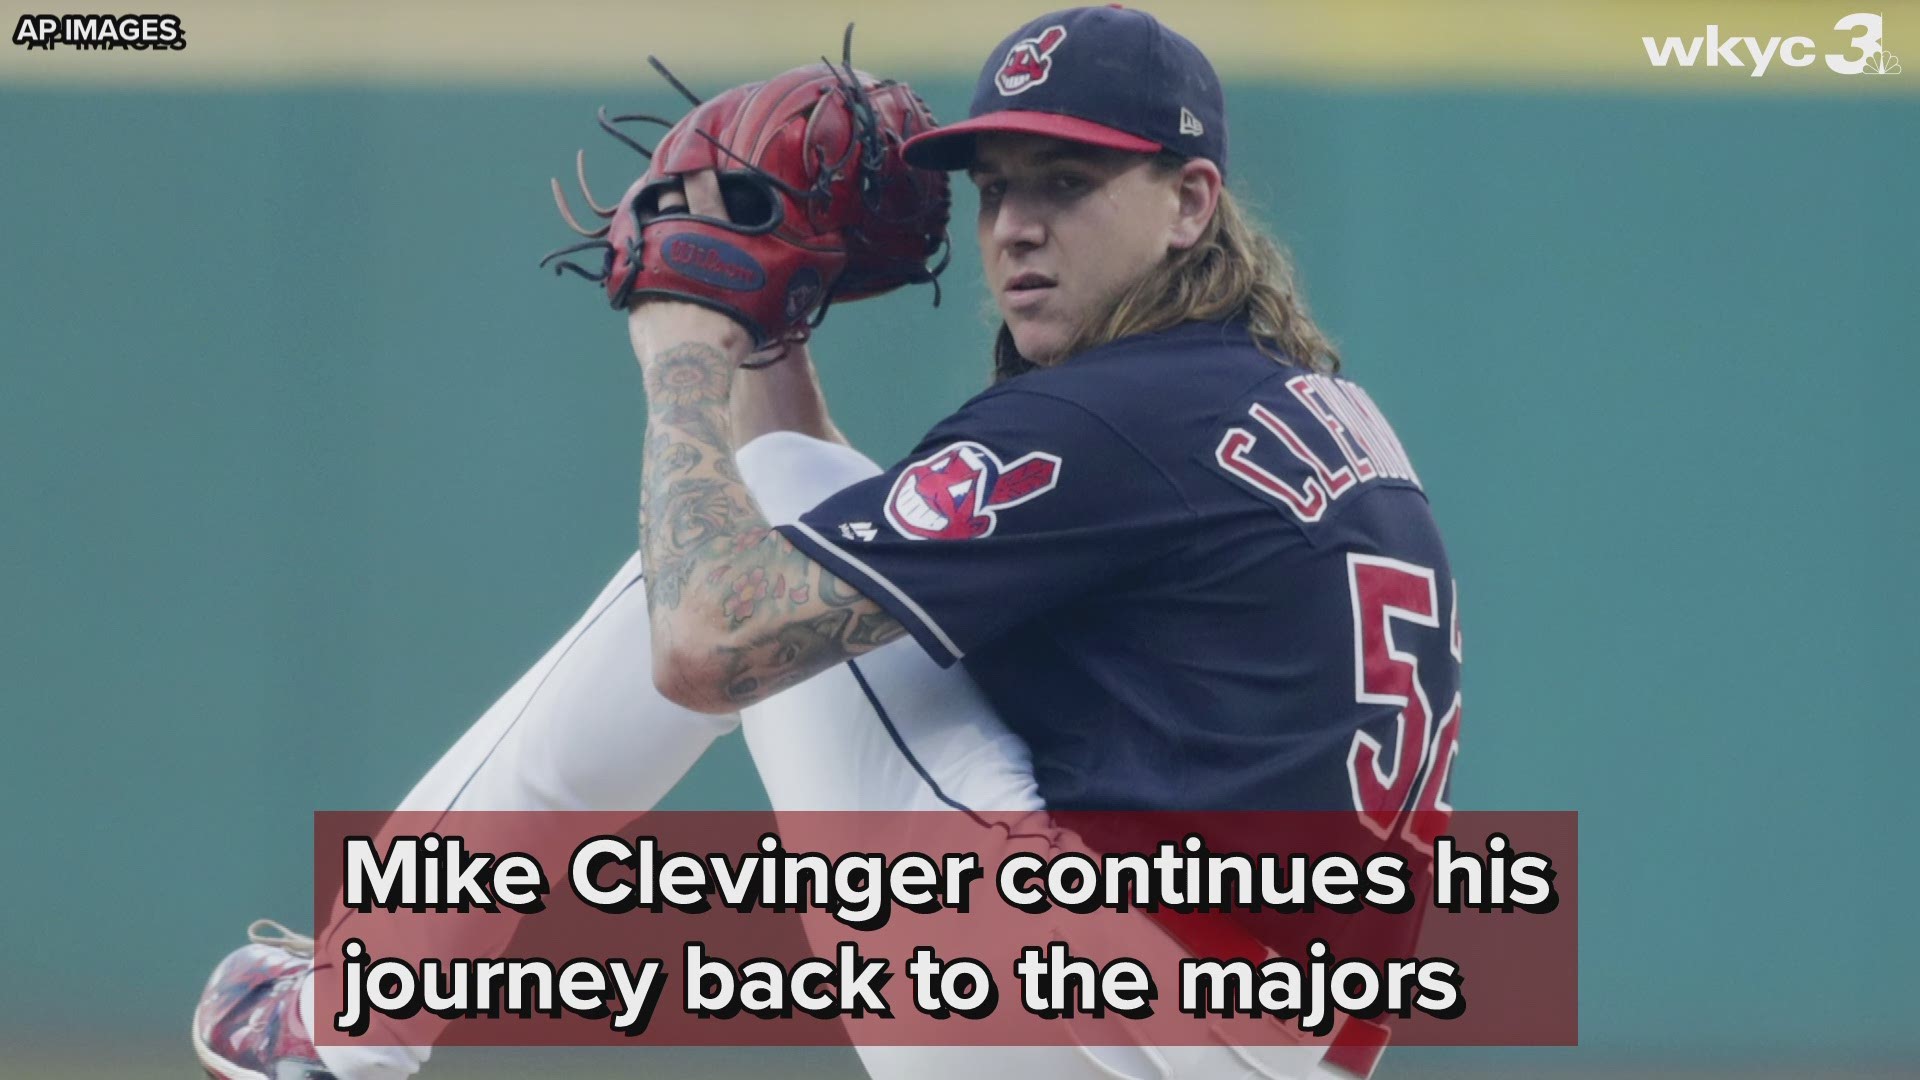 The comeback is on for Cleveland Indians starting pitcher Mike Clevinger, as he is set for a rehab start with the Akron RubberDucks tonight.